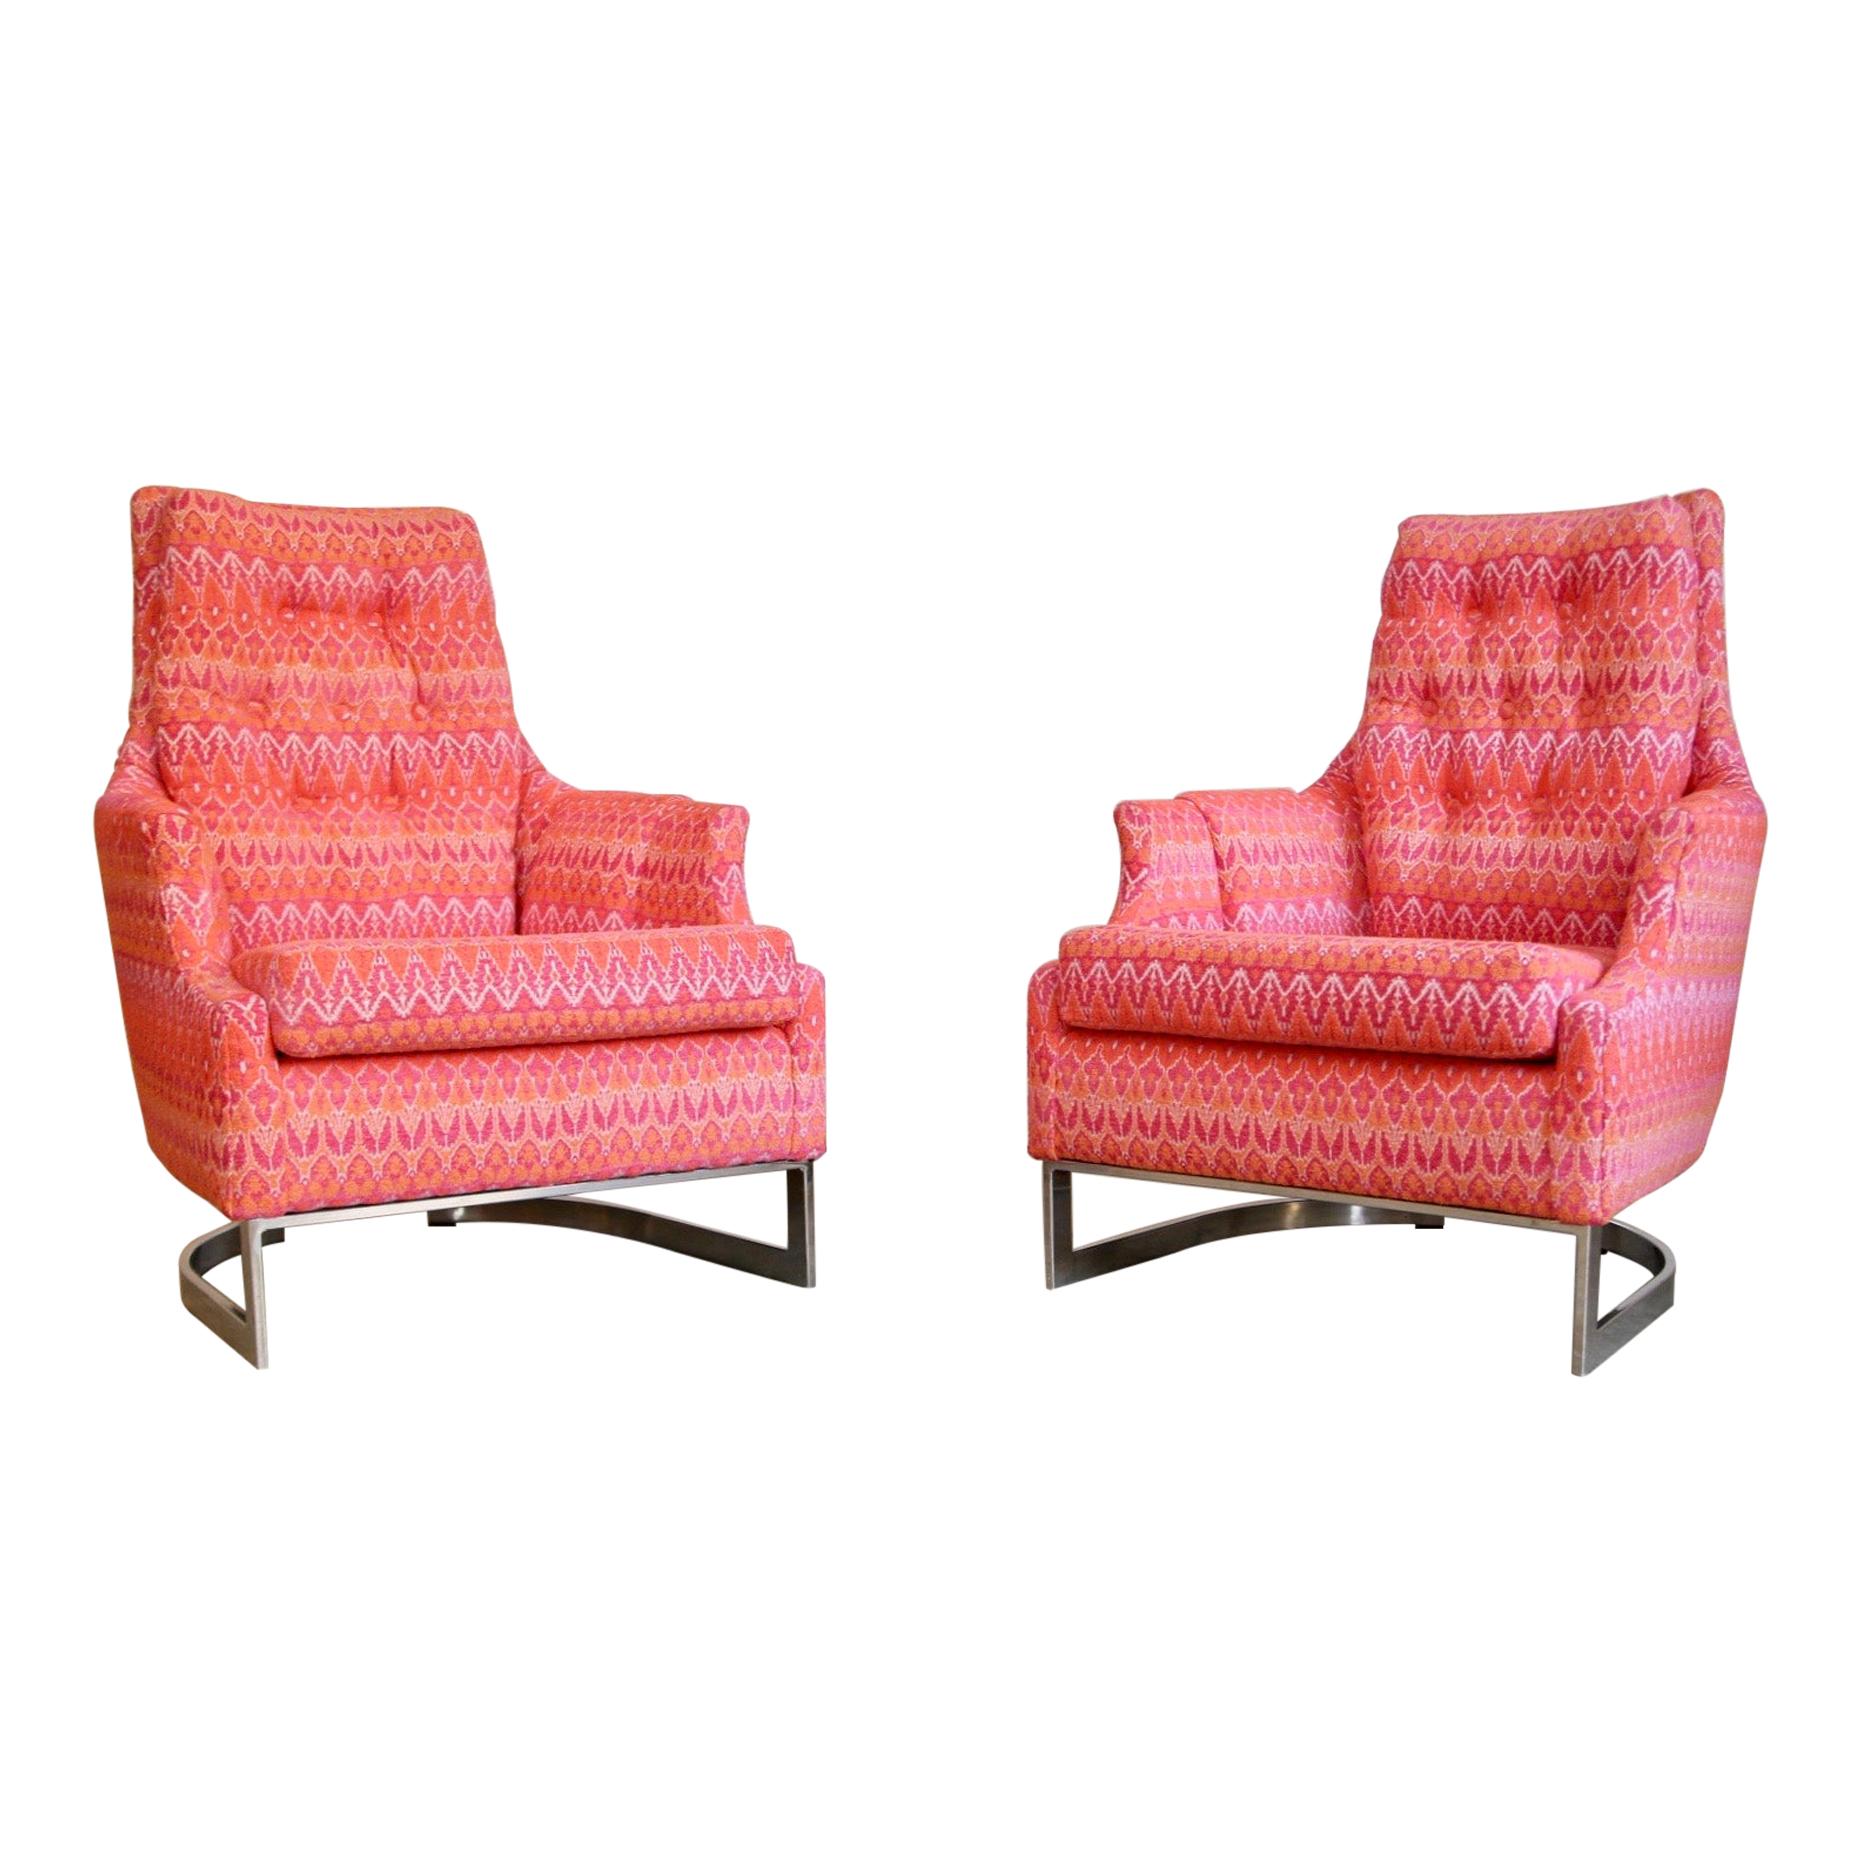 Chrome Milo Baughman Reupholstered Lounge Chairs